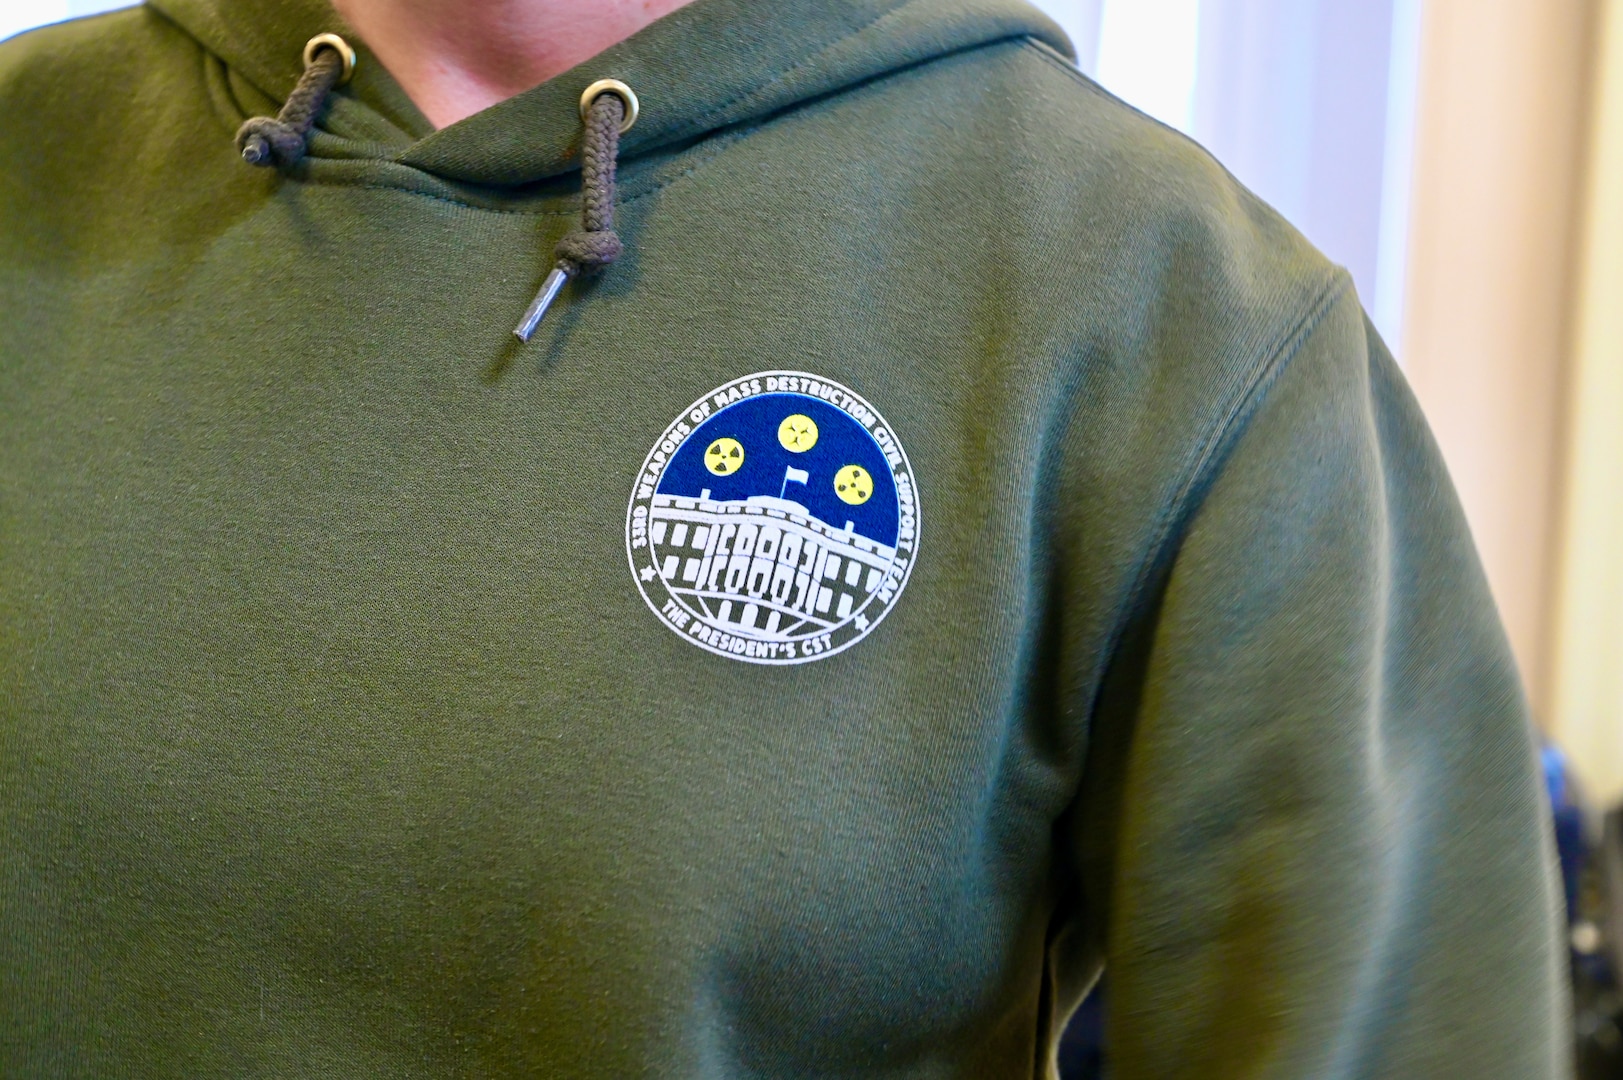 U.S. Army Staff Sgt. Chasity Townsend, administration noncommissioned officer, 33rd WMD-CST, wears a sweatshirt that bears the symbol associated with being ‘The President’s CST,' at the D.C. Armory, March 7, 2024.  The 33rd WMD-CST was strategically positioned to respond effectively with D.C. Fire, U.S. Secret Service, U.S. Capitol Police, and CBRNE Enhanced Response Force Packages (CERFP) units.